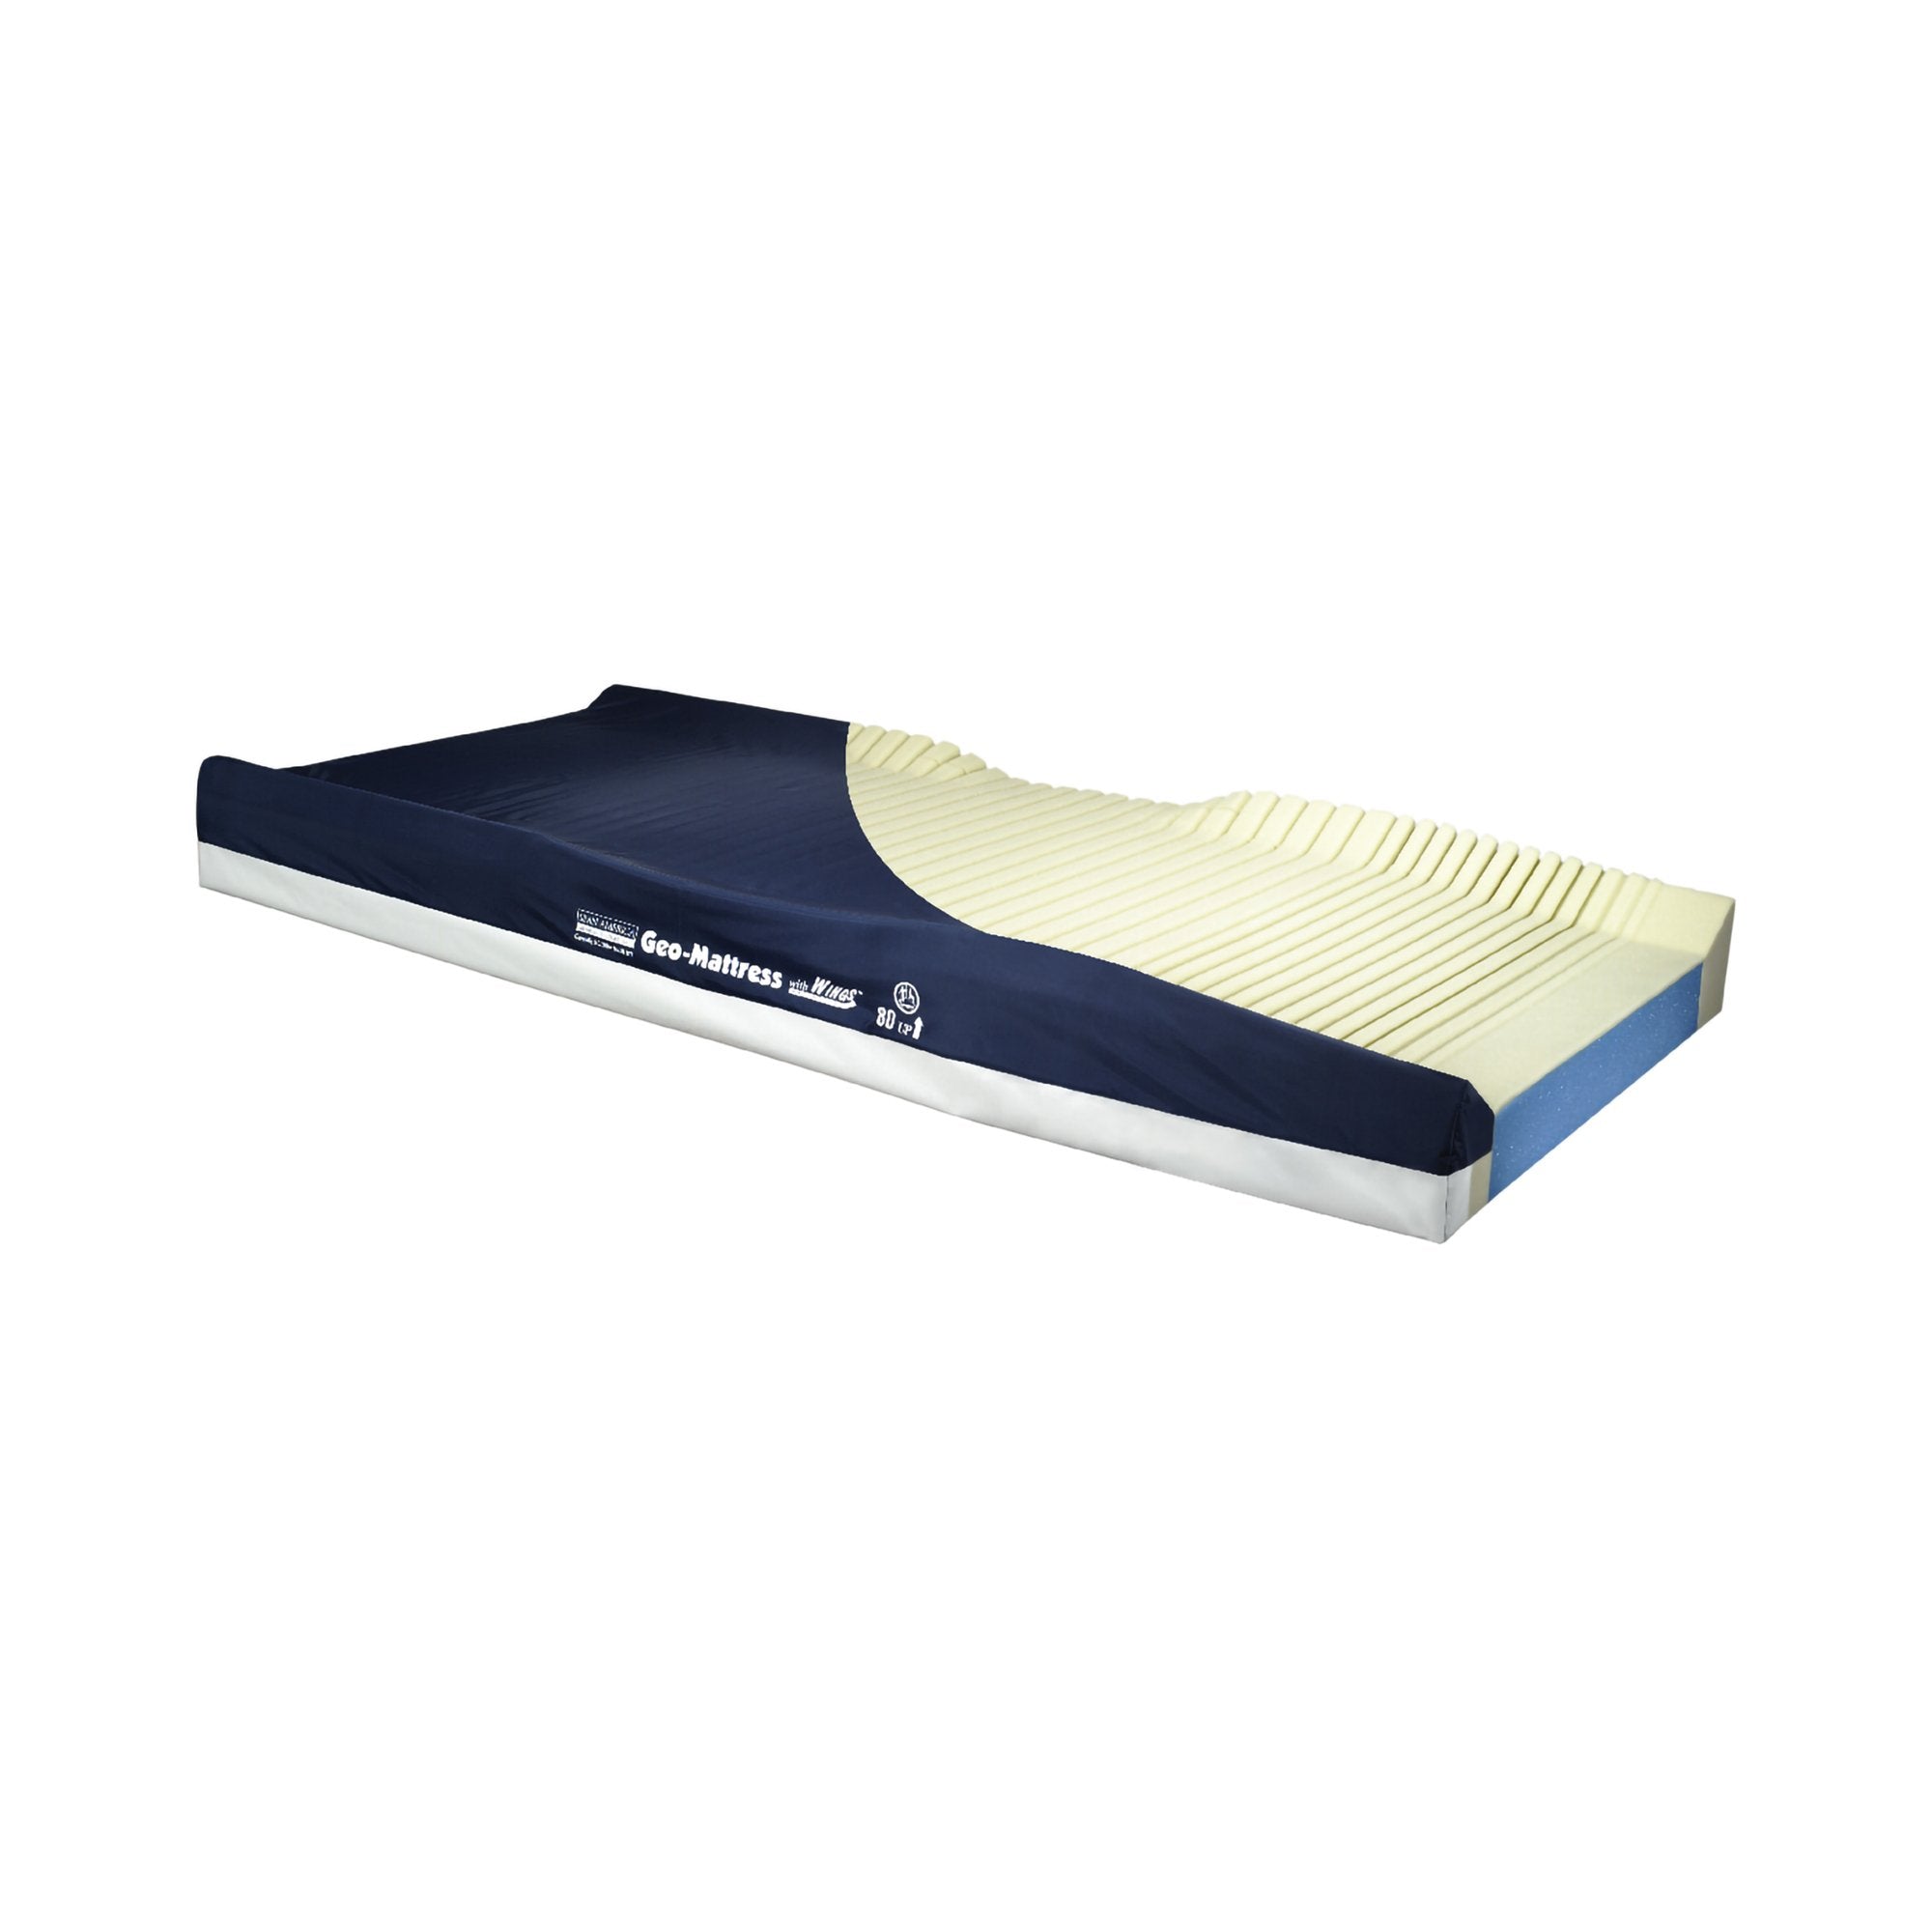 Bed Mattress Geo-Mattress® with Wings Therapeutic Raised Perimeter Mattress 35 X 84 X 6 Inch, 8 Inch Side